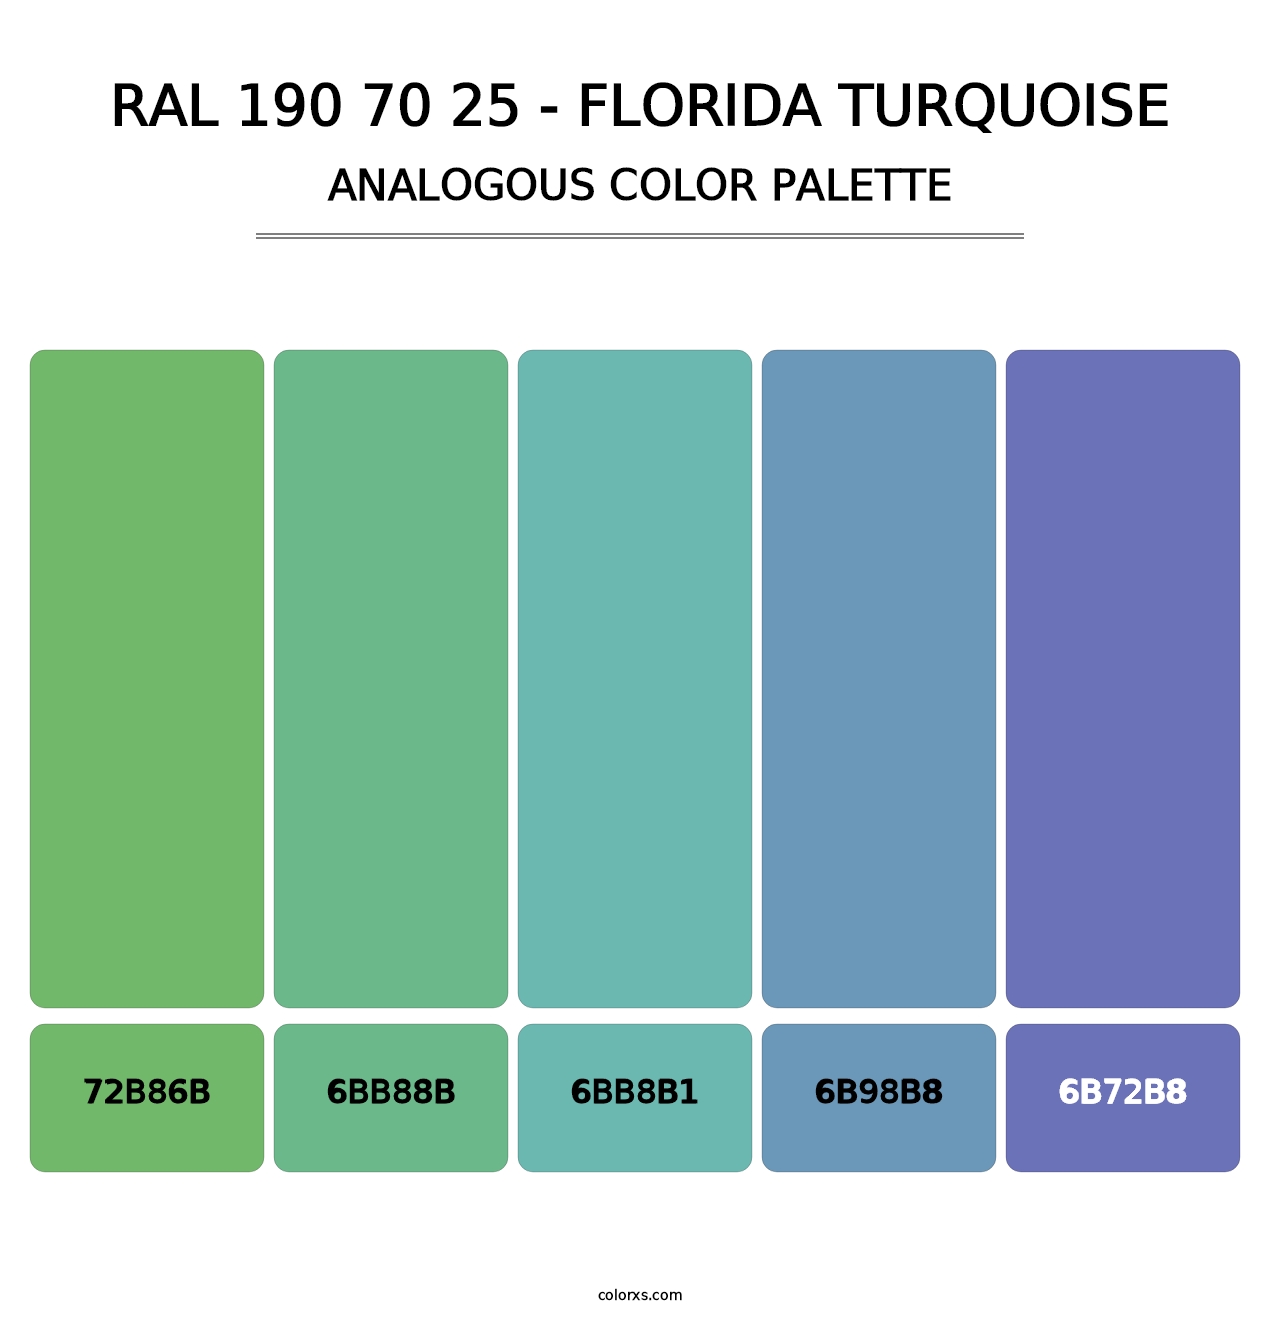 RAL 190 70 25 - Florida Turquoise - Analogous Color Palette